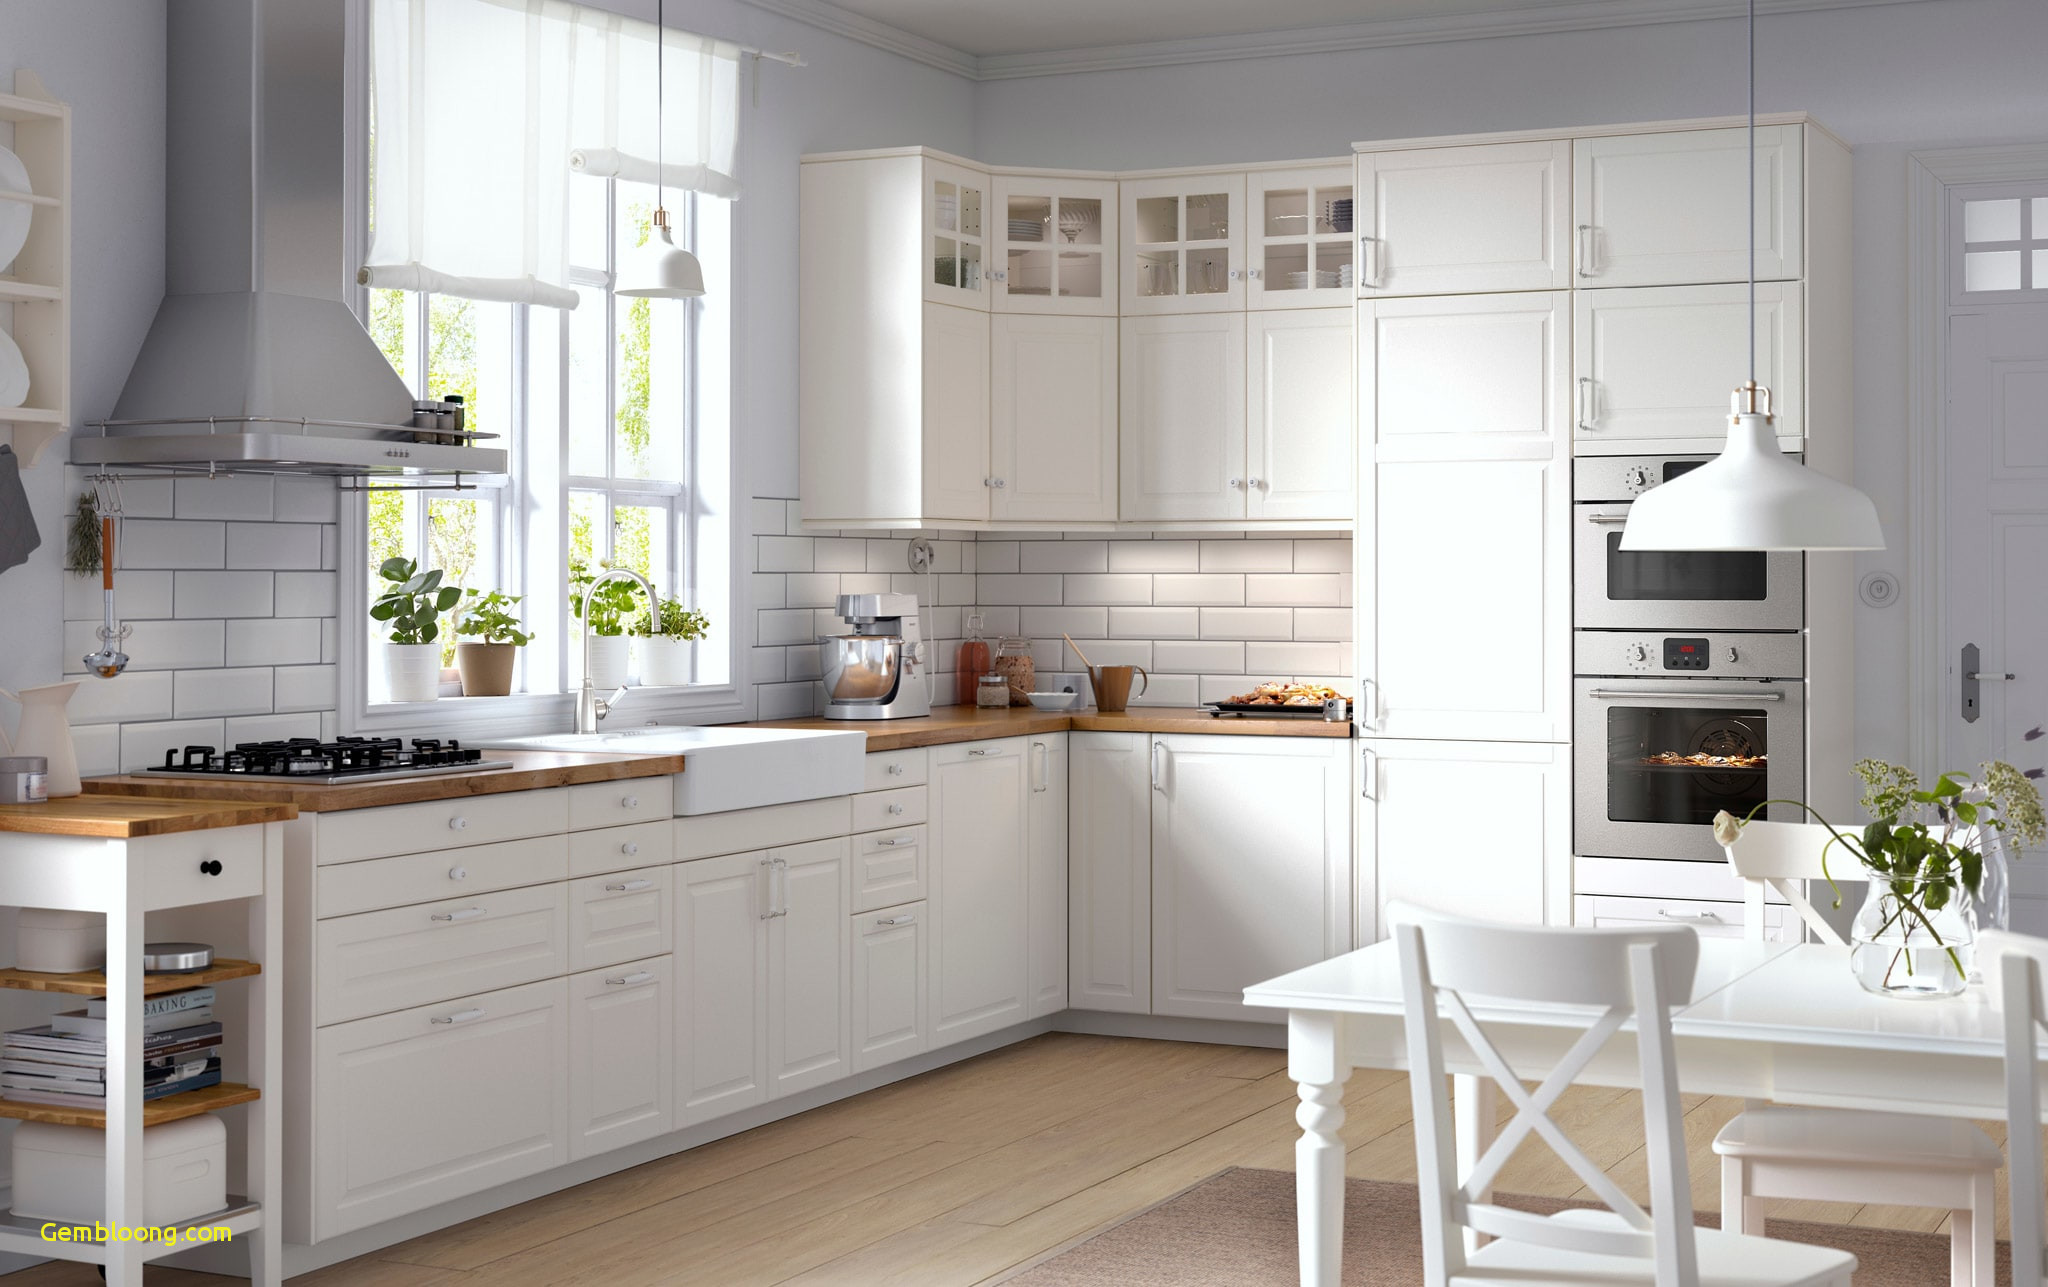 Do You Make these Simple Mistakes In Ikea Kitchen? Luxury Kitchens